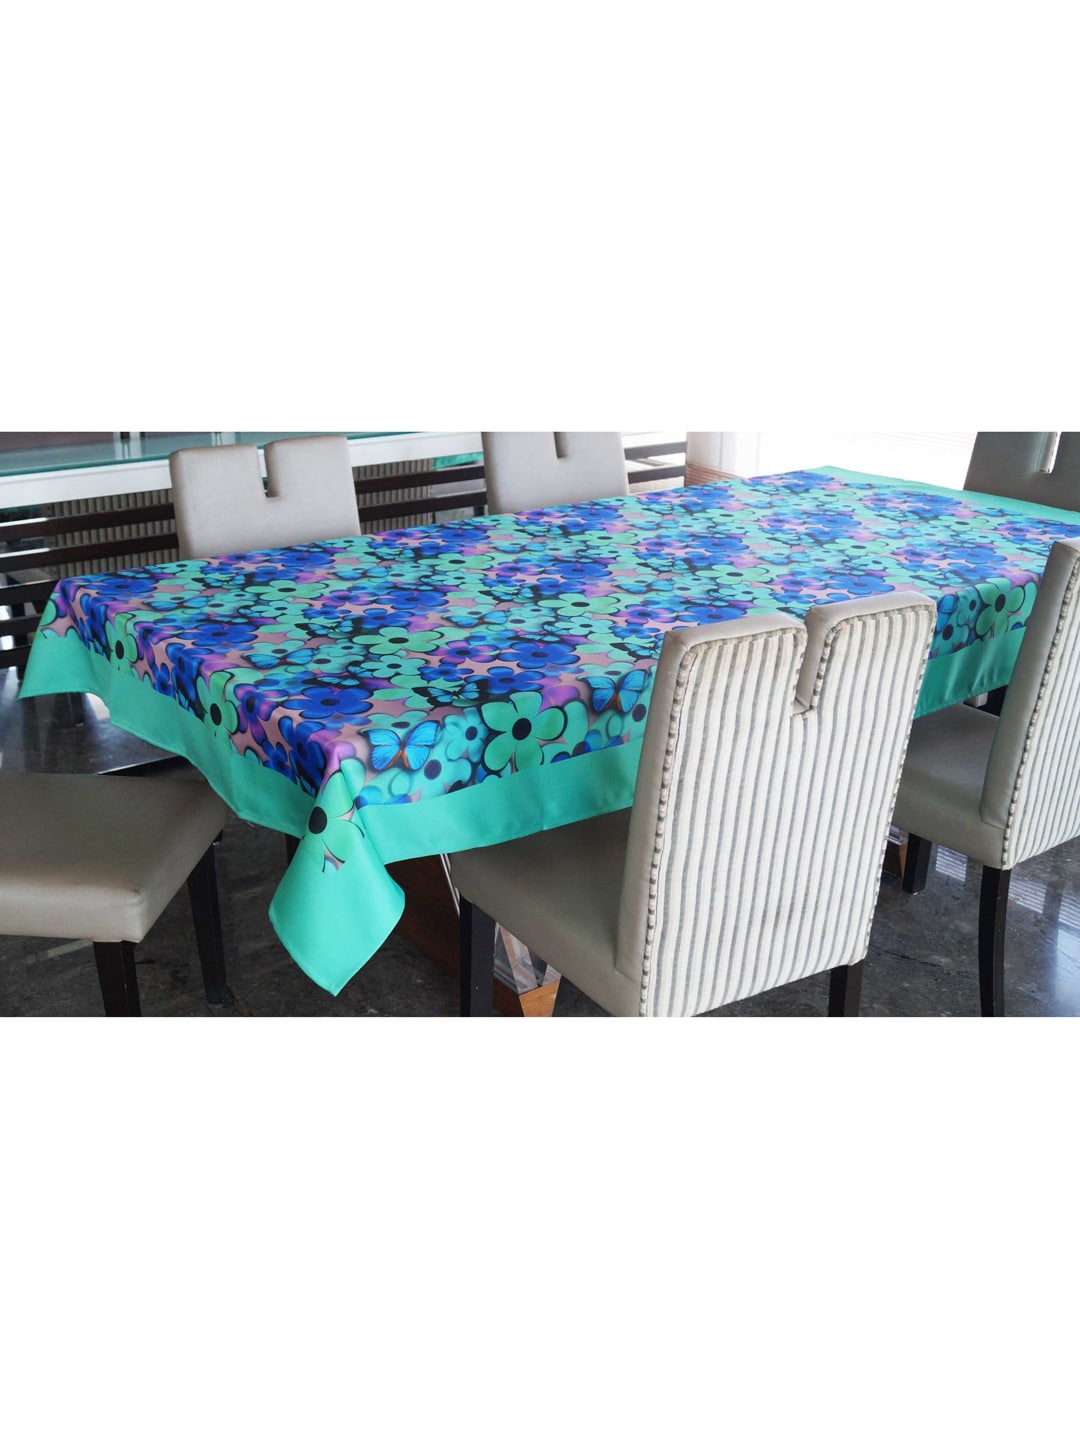 Lushomes Blue & Green Digital Printed 6 Seater Table Cover Price in India